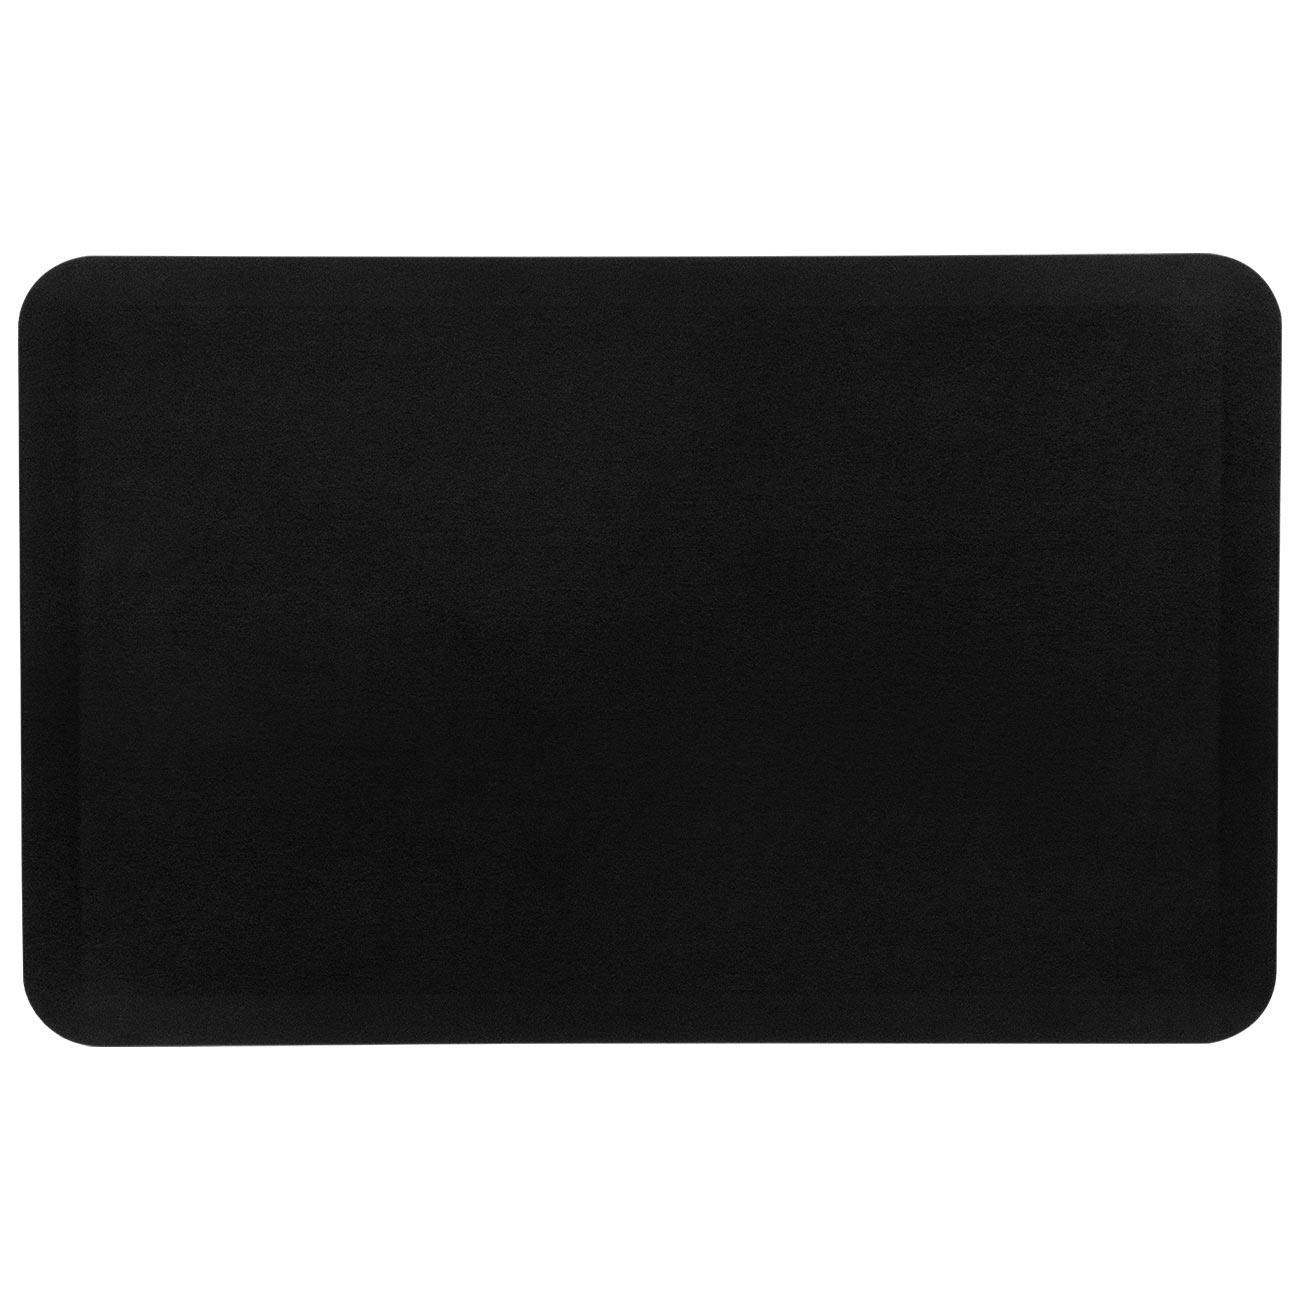 EcoLast Premium Brushed Standing Mat by GelPro - iMovR